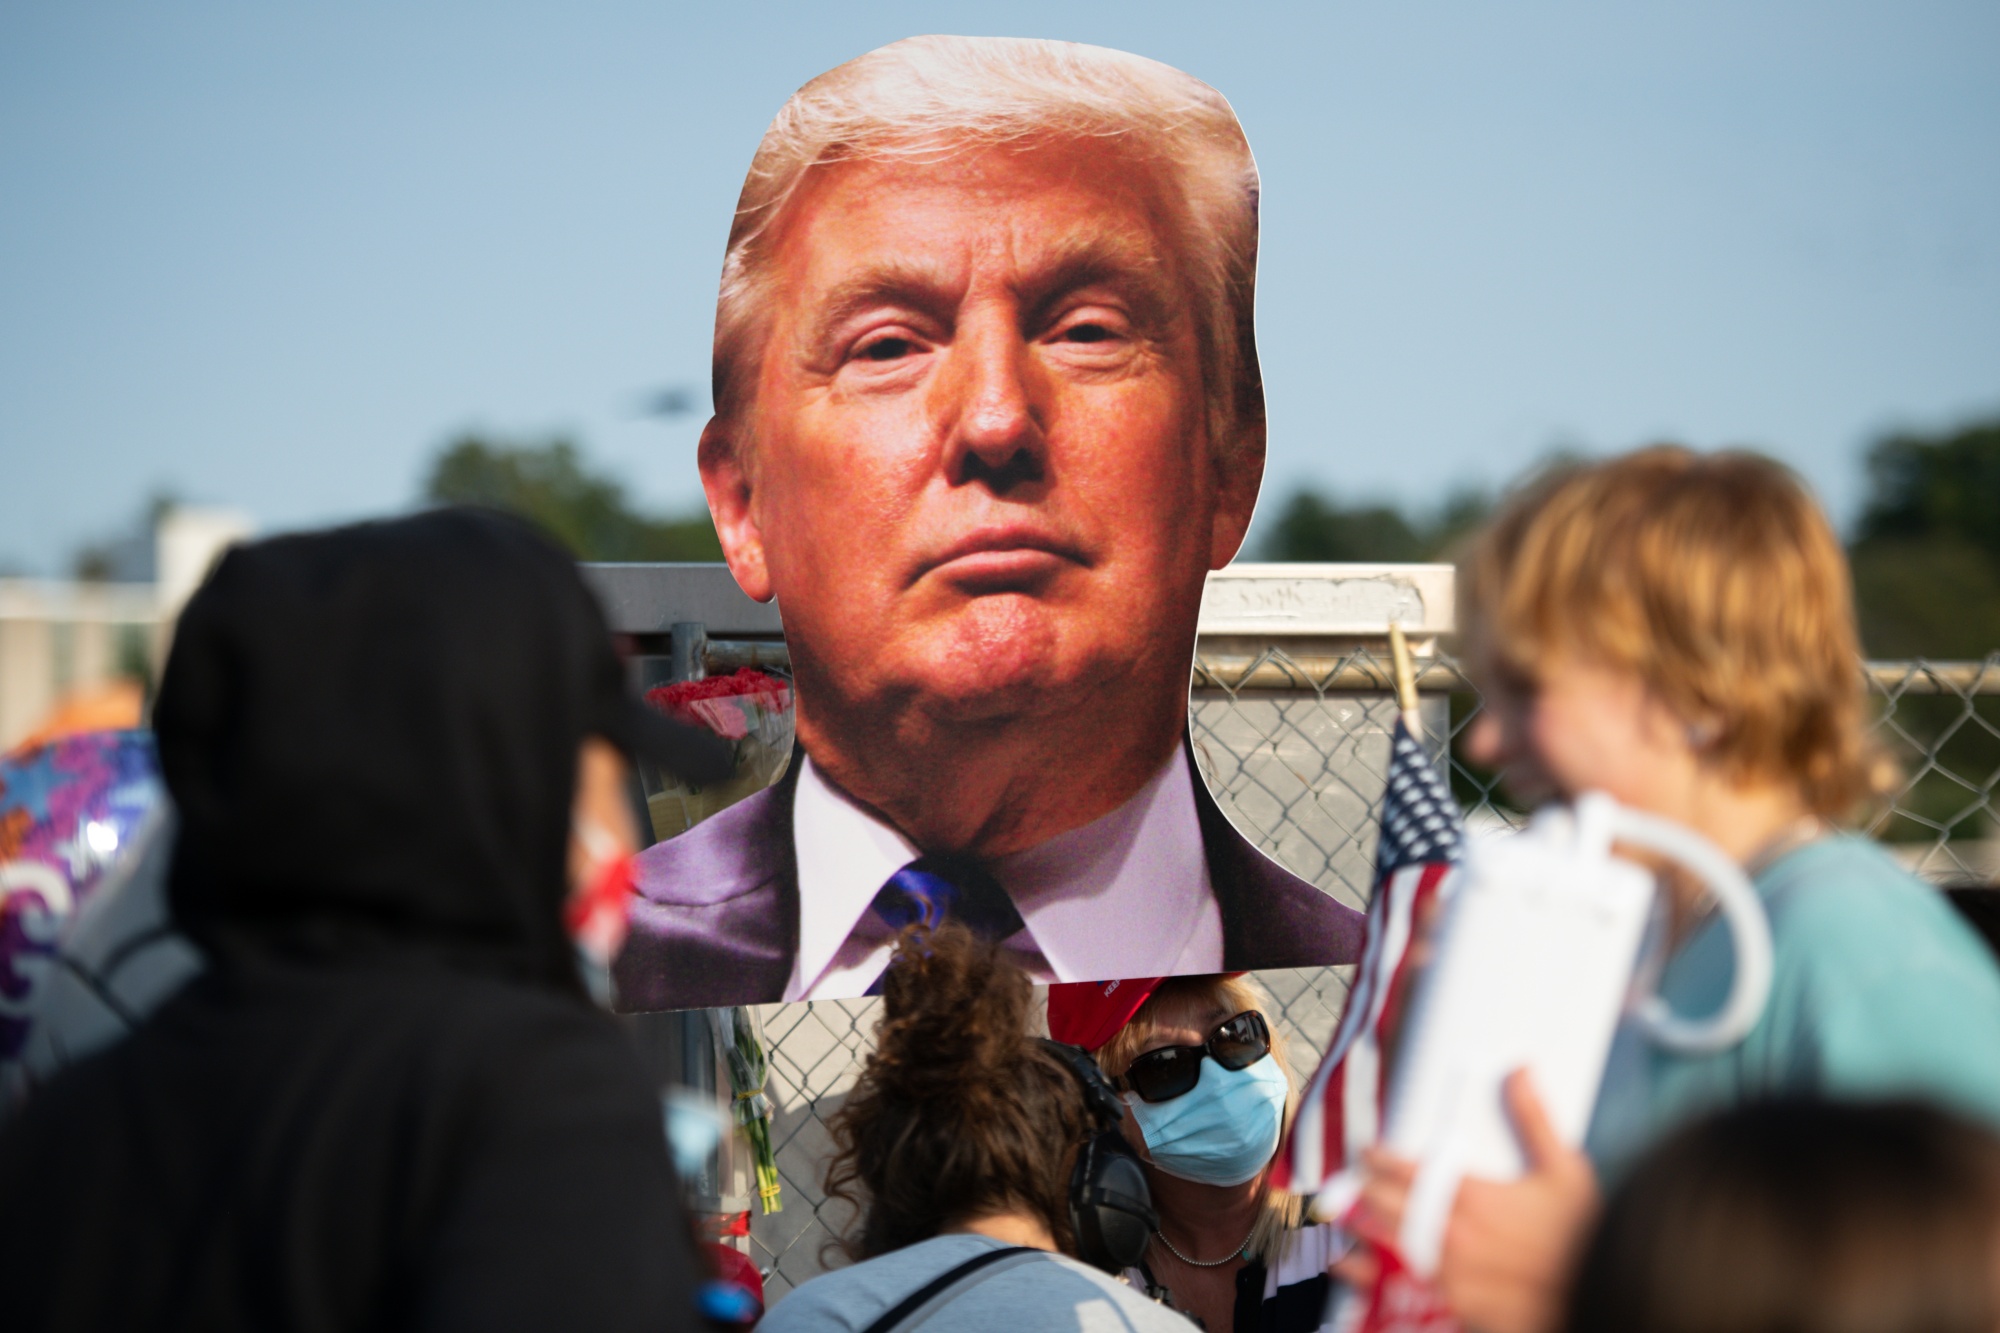 A cardboard cutout of U.S. President Donald Trump is displayed as supporters rally outside Walter Reed National Military Medical Center in Bethesda, Maryland, on Oct. 4.